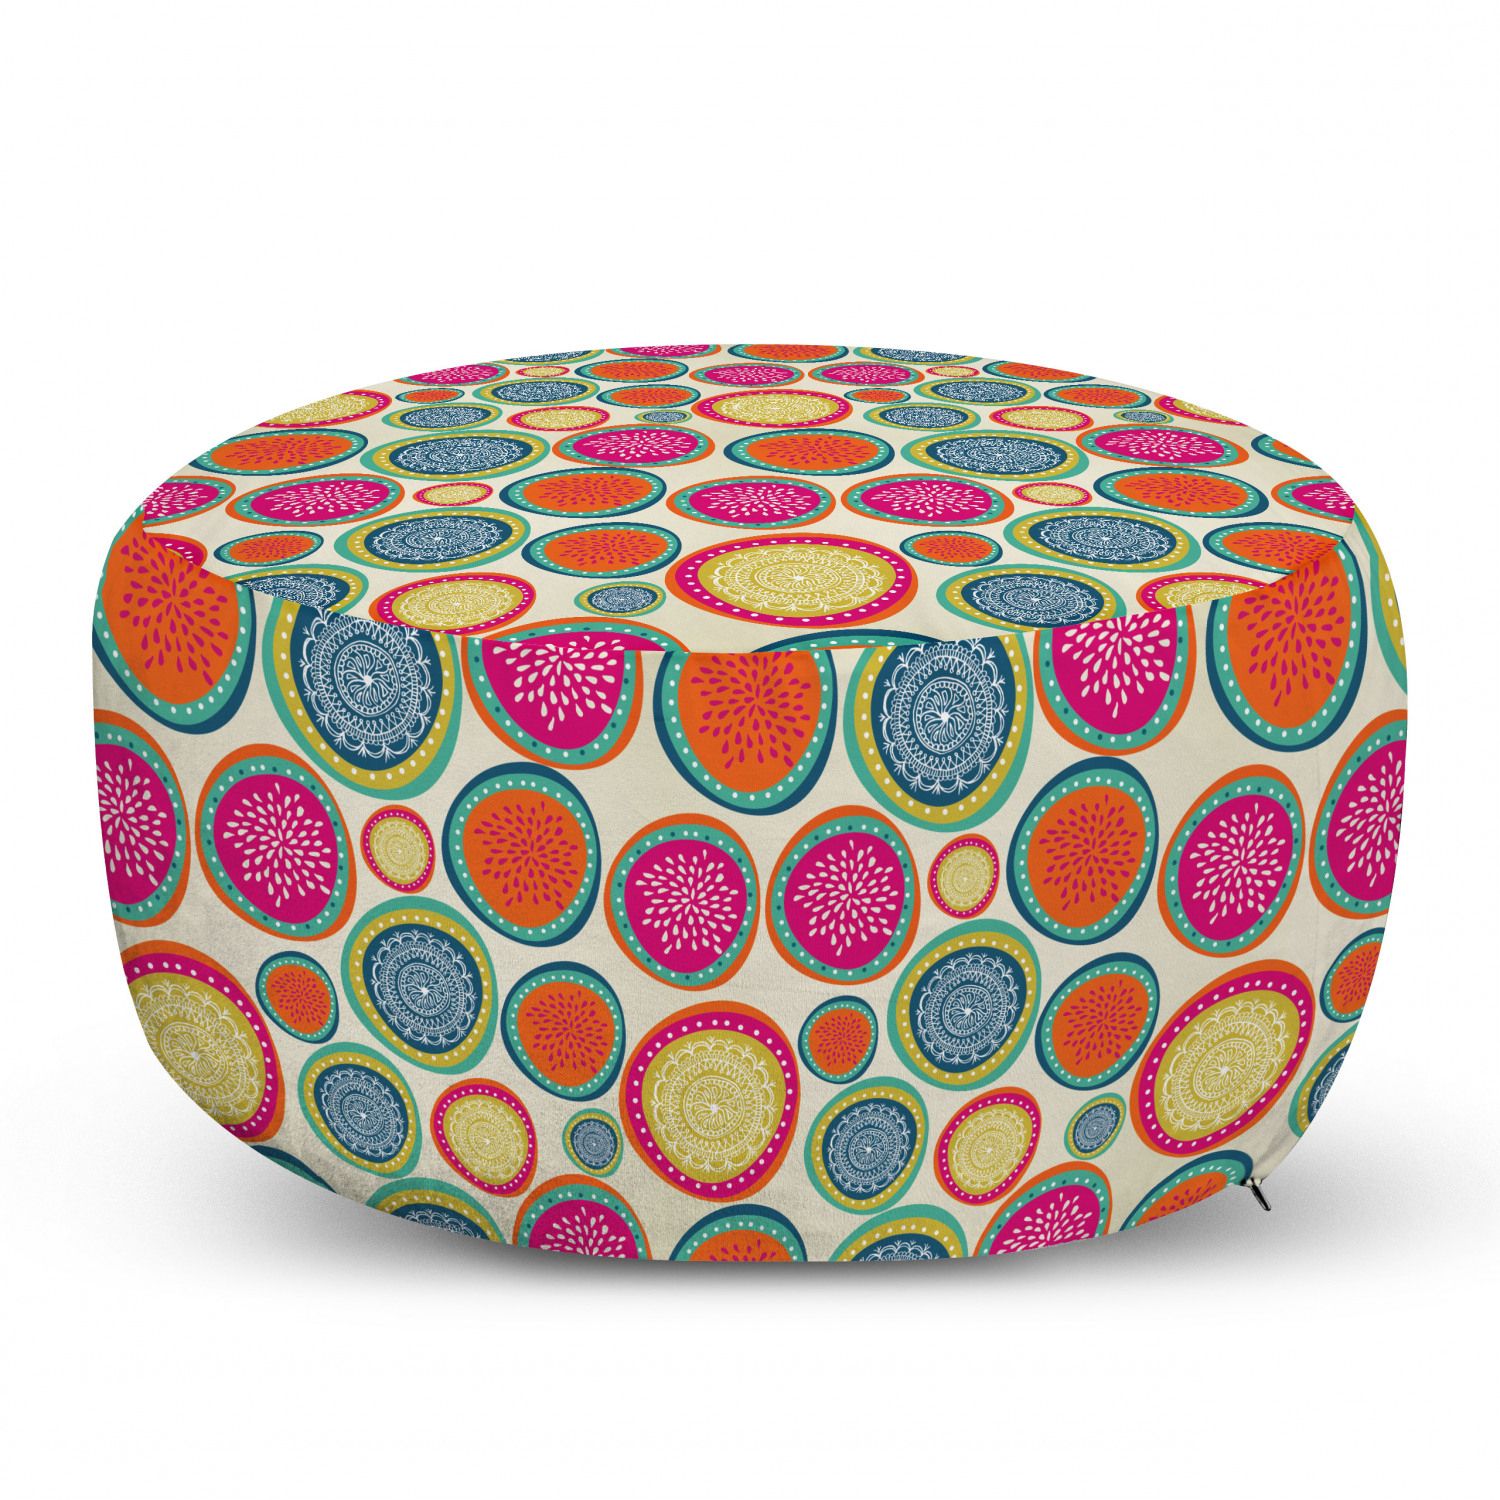 Colorful Ottoman Pouf, Doodle Style Lively Colored Round Shapes With And  Floral Motifs, Decorative Soft Foot Rest With Removable Cover Living Room  And Bedroom, Multicolor,ambesonne – Walmart Inside Multicolor Ottomans (View 13 of 15)